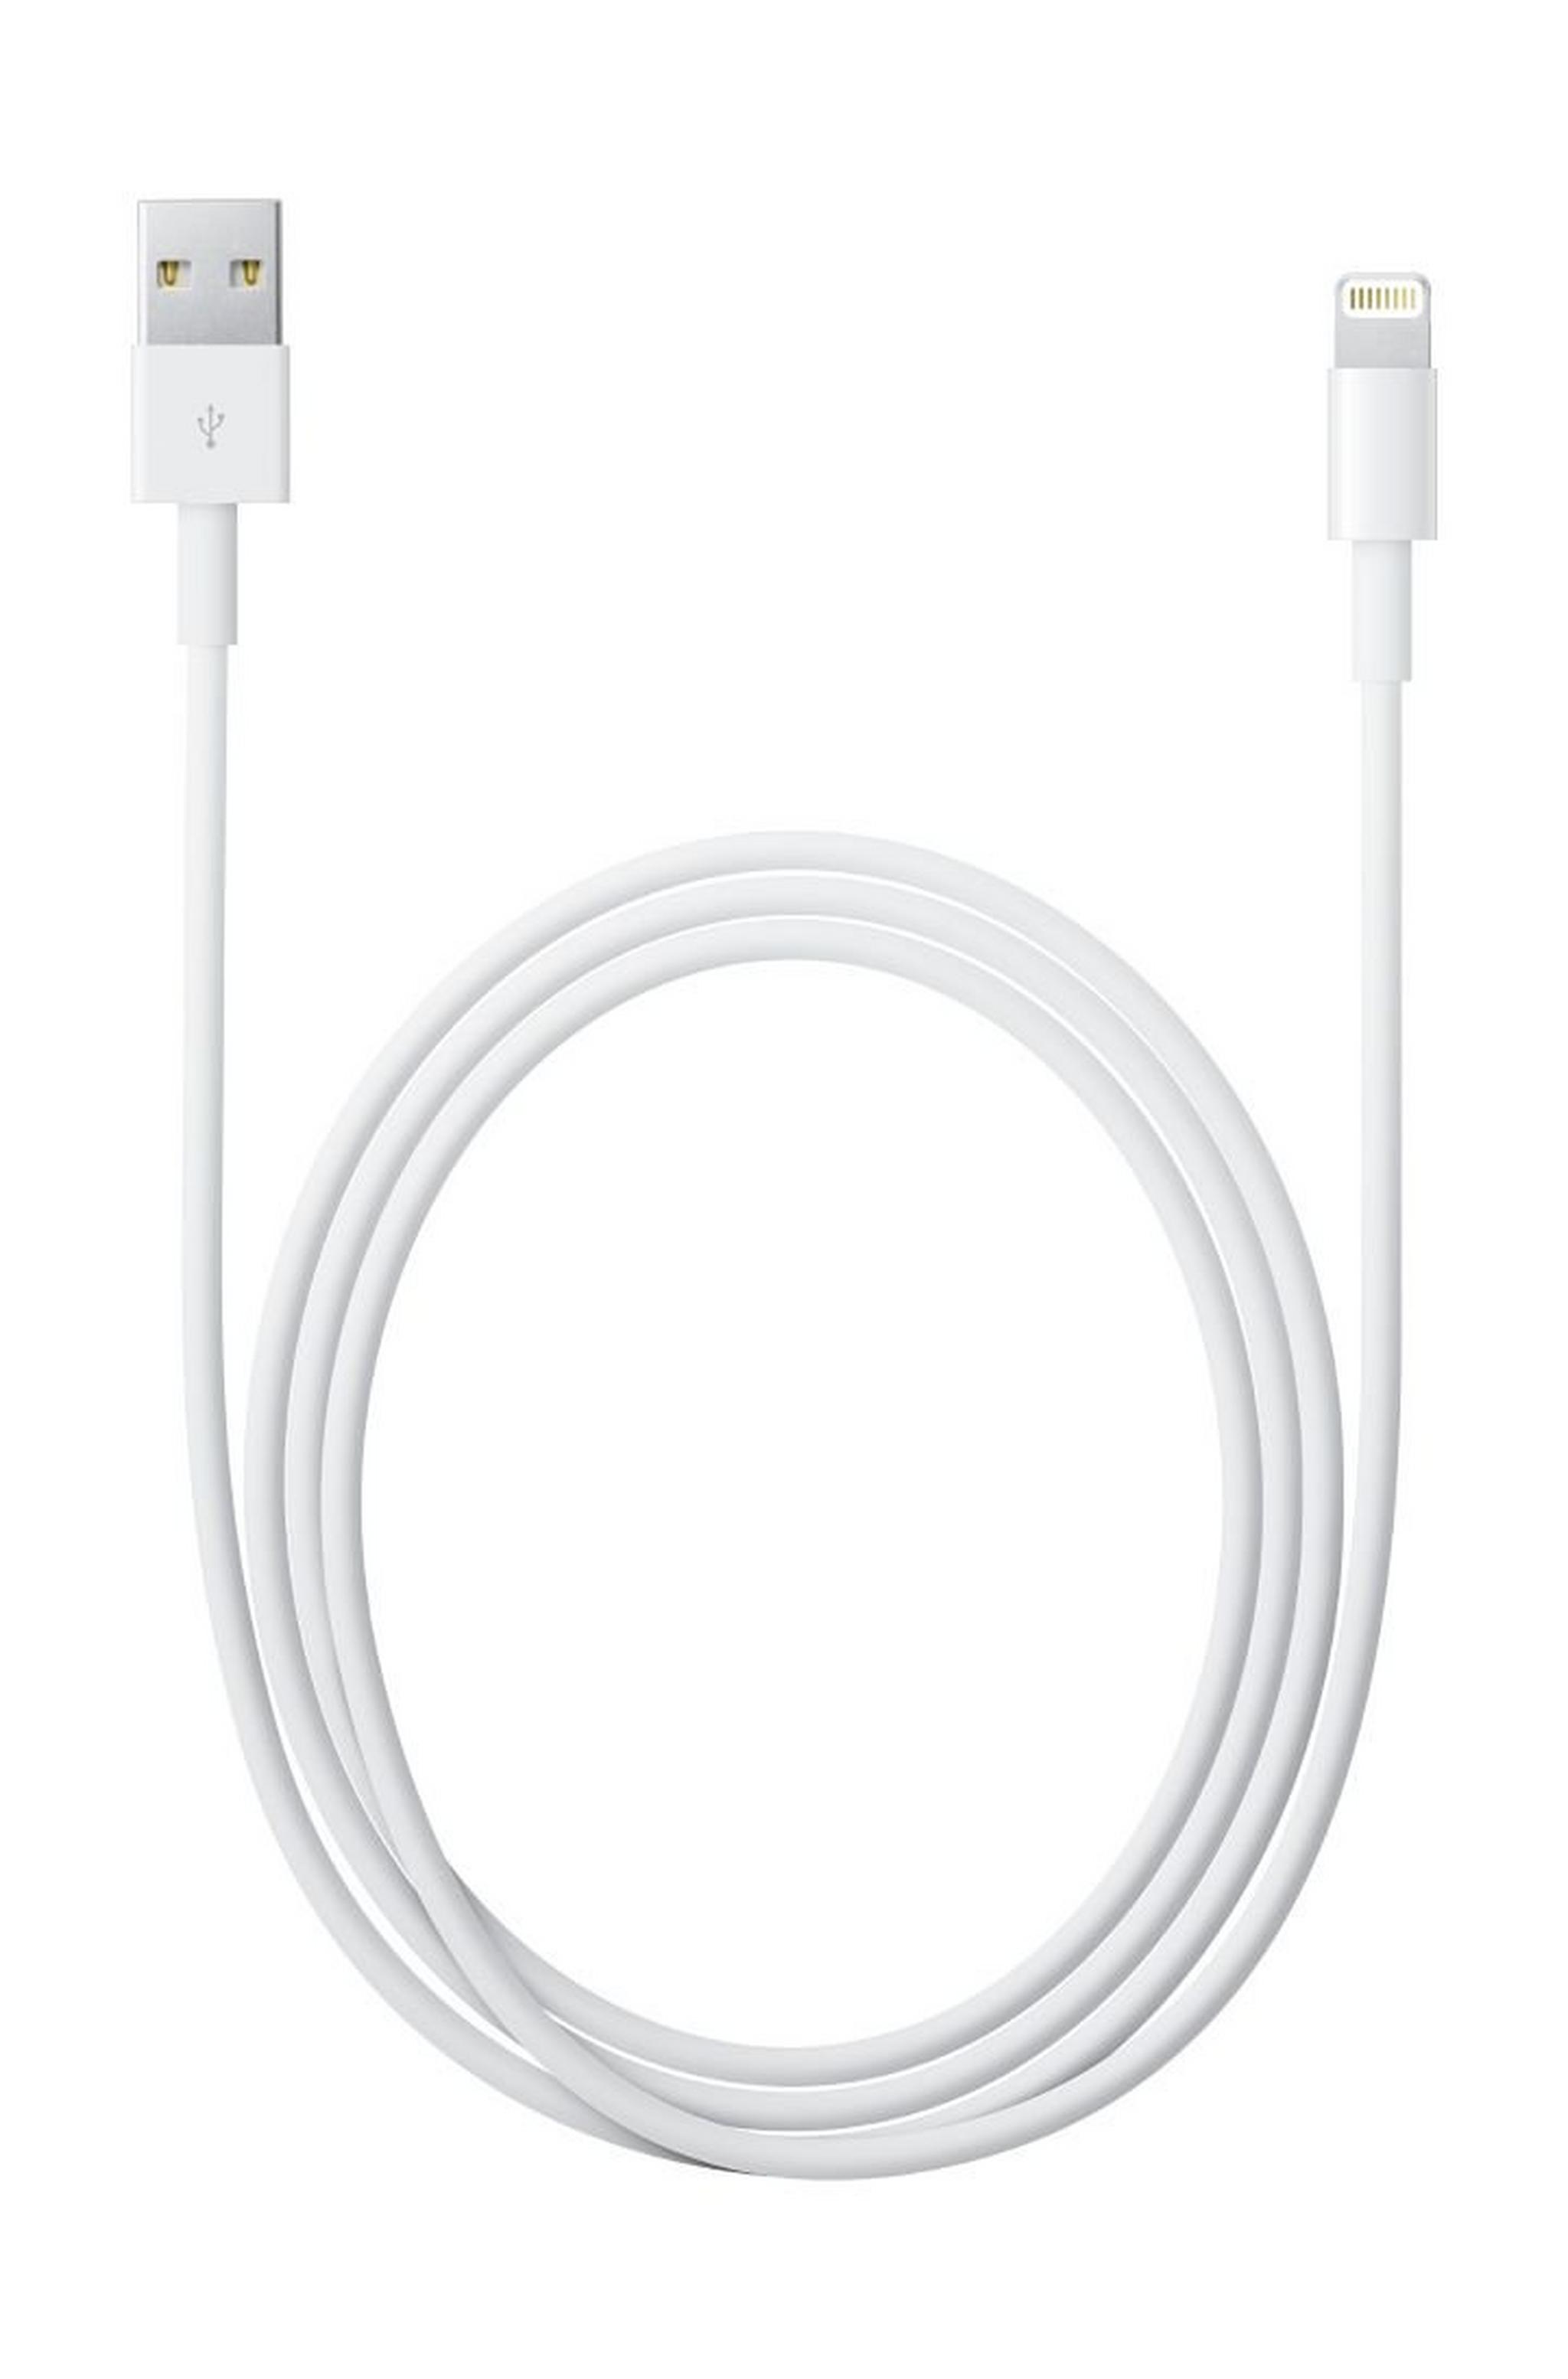 Apple MD818 Lightning to USB Cable 1M - White